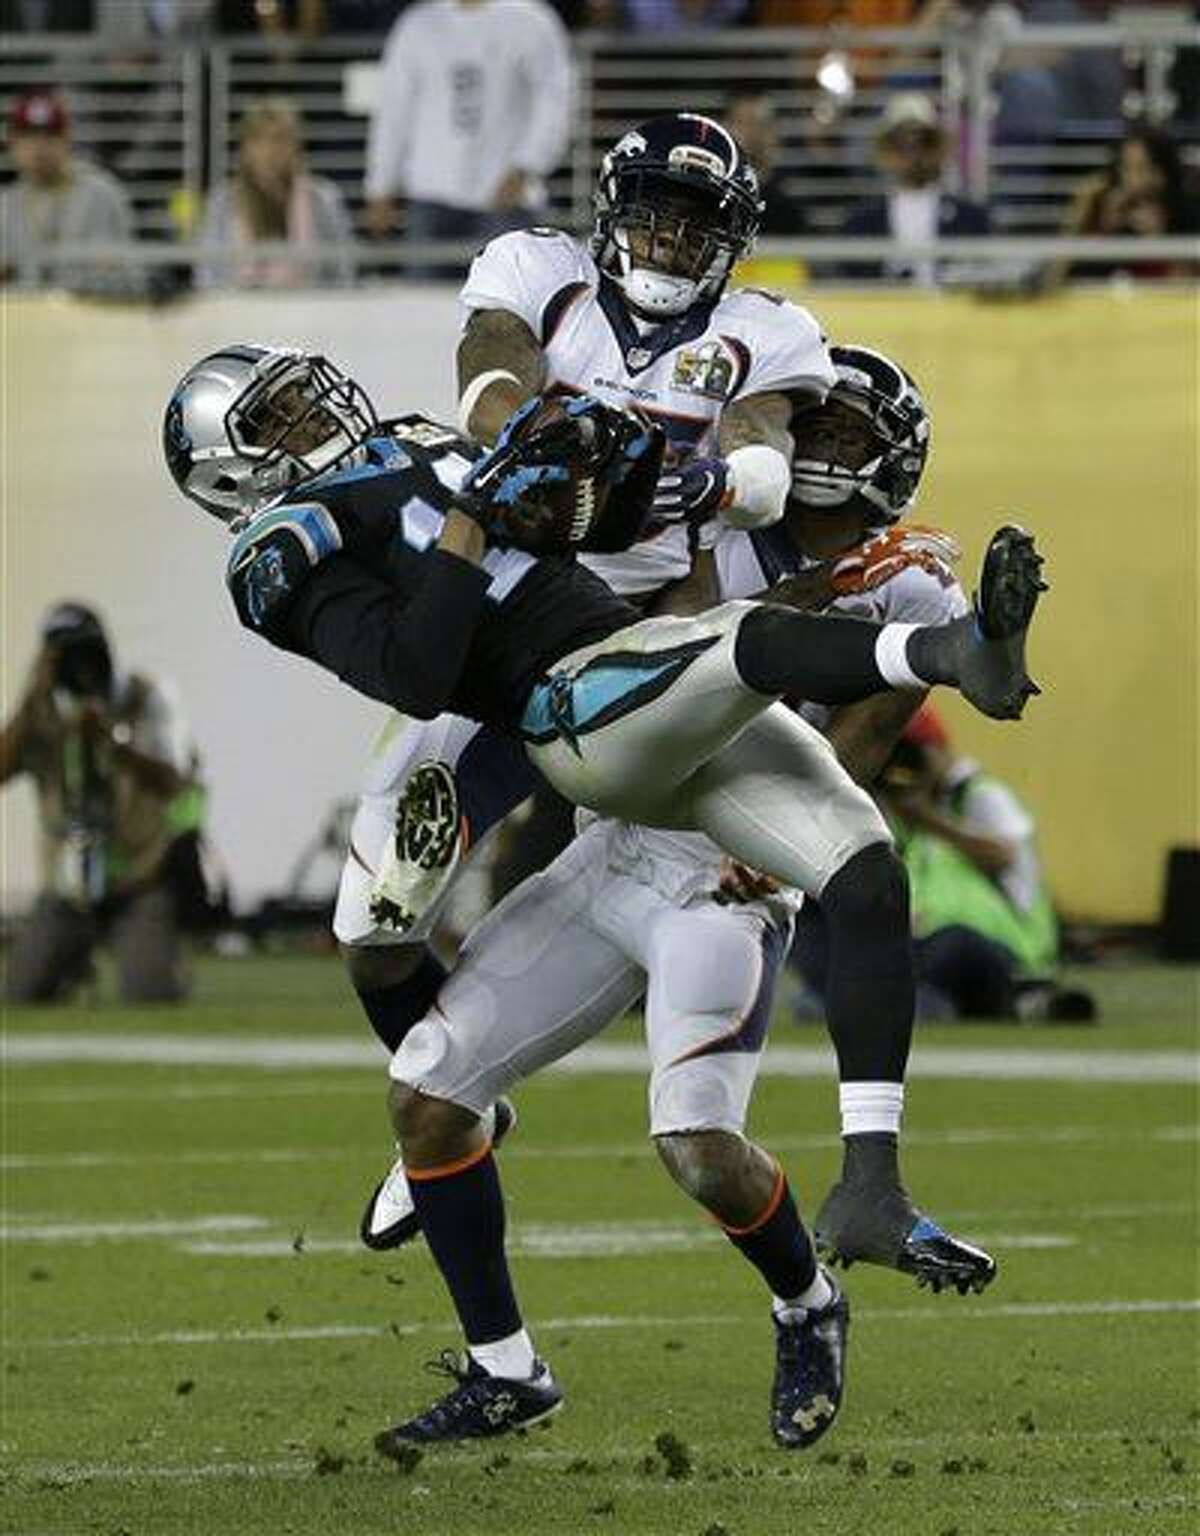 Carolina Panthers’ Corey Brown (10) catches a pass in front of Denver Broncos’ T.J. Ward (43) and Aqib Talib (21) during the second half of the NFL Super Bowl 50 football game Sunday, Feb. 7, 2016, in Santa Clara, Calif. (AP Photo/Gregory Bull)